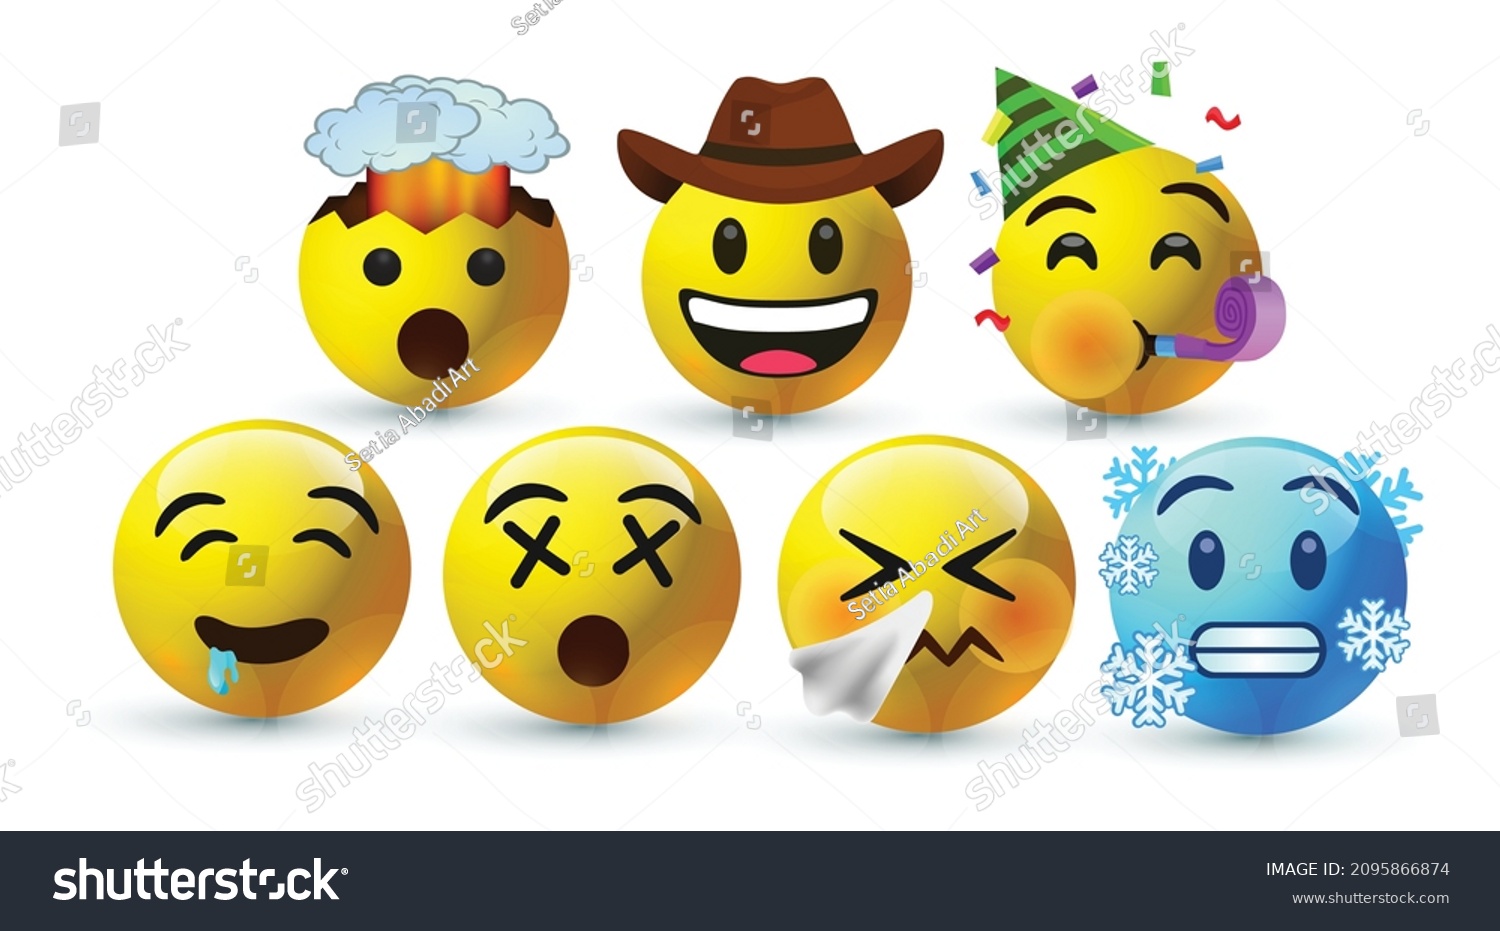 SVG of icon 3d vector round yellow cartoon bubble emoticons social media Whatsapp Instagram Facebook chat comment reactions icon template face Sneezing cold dizzy Exploding Partying emoji character message svg